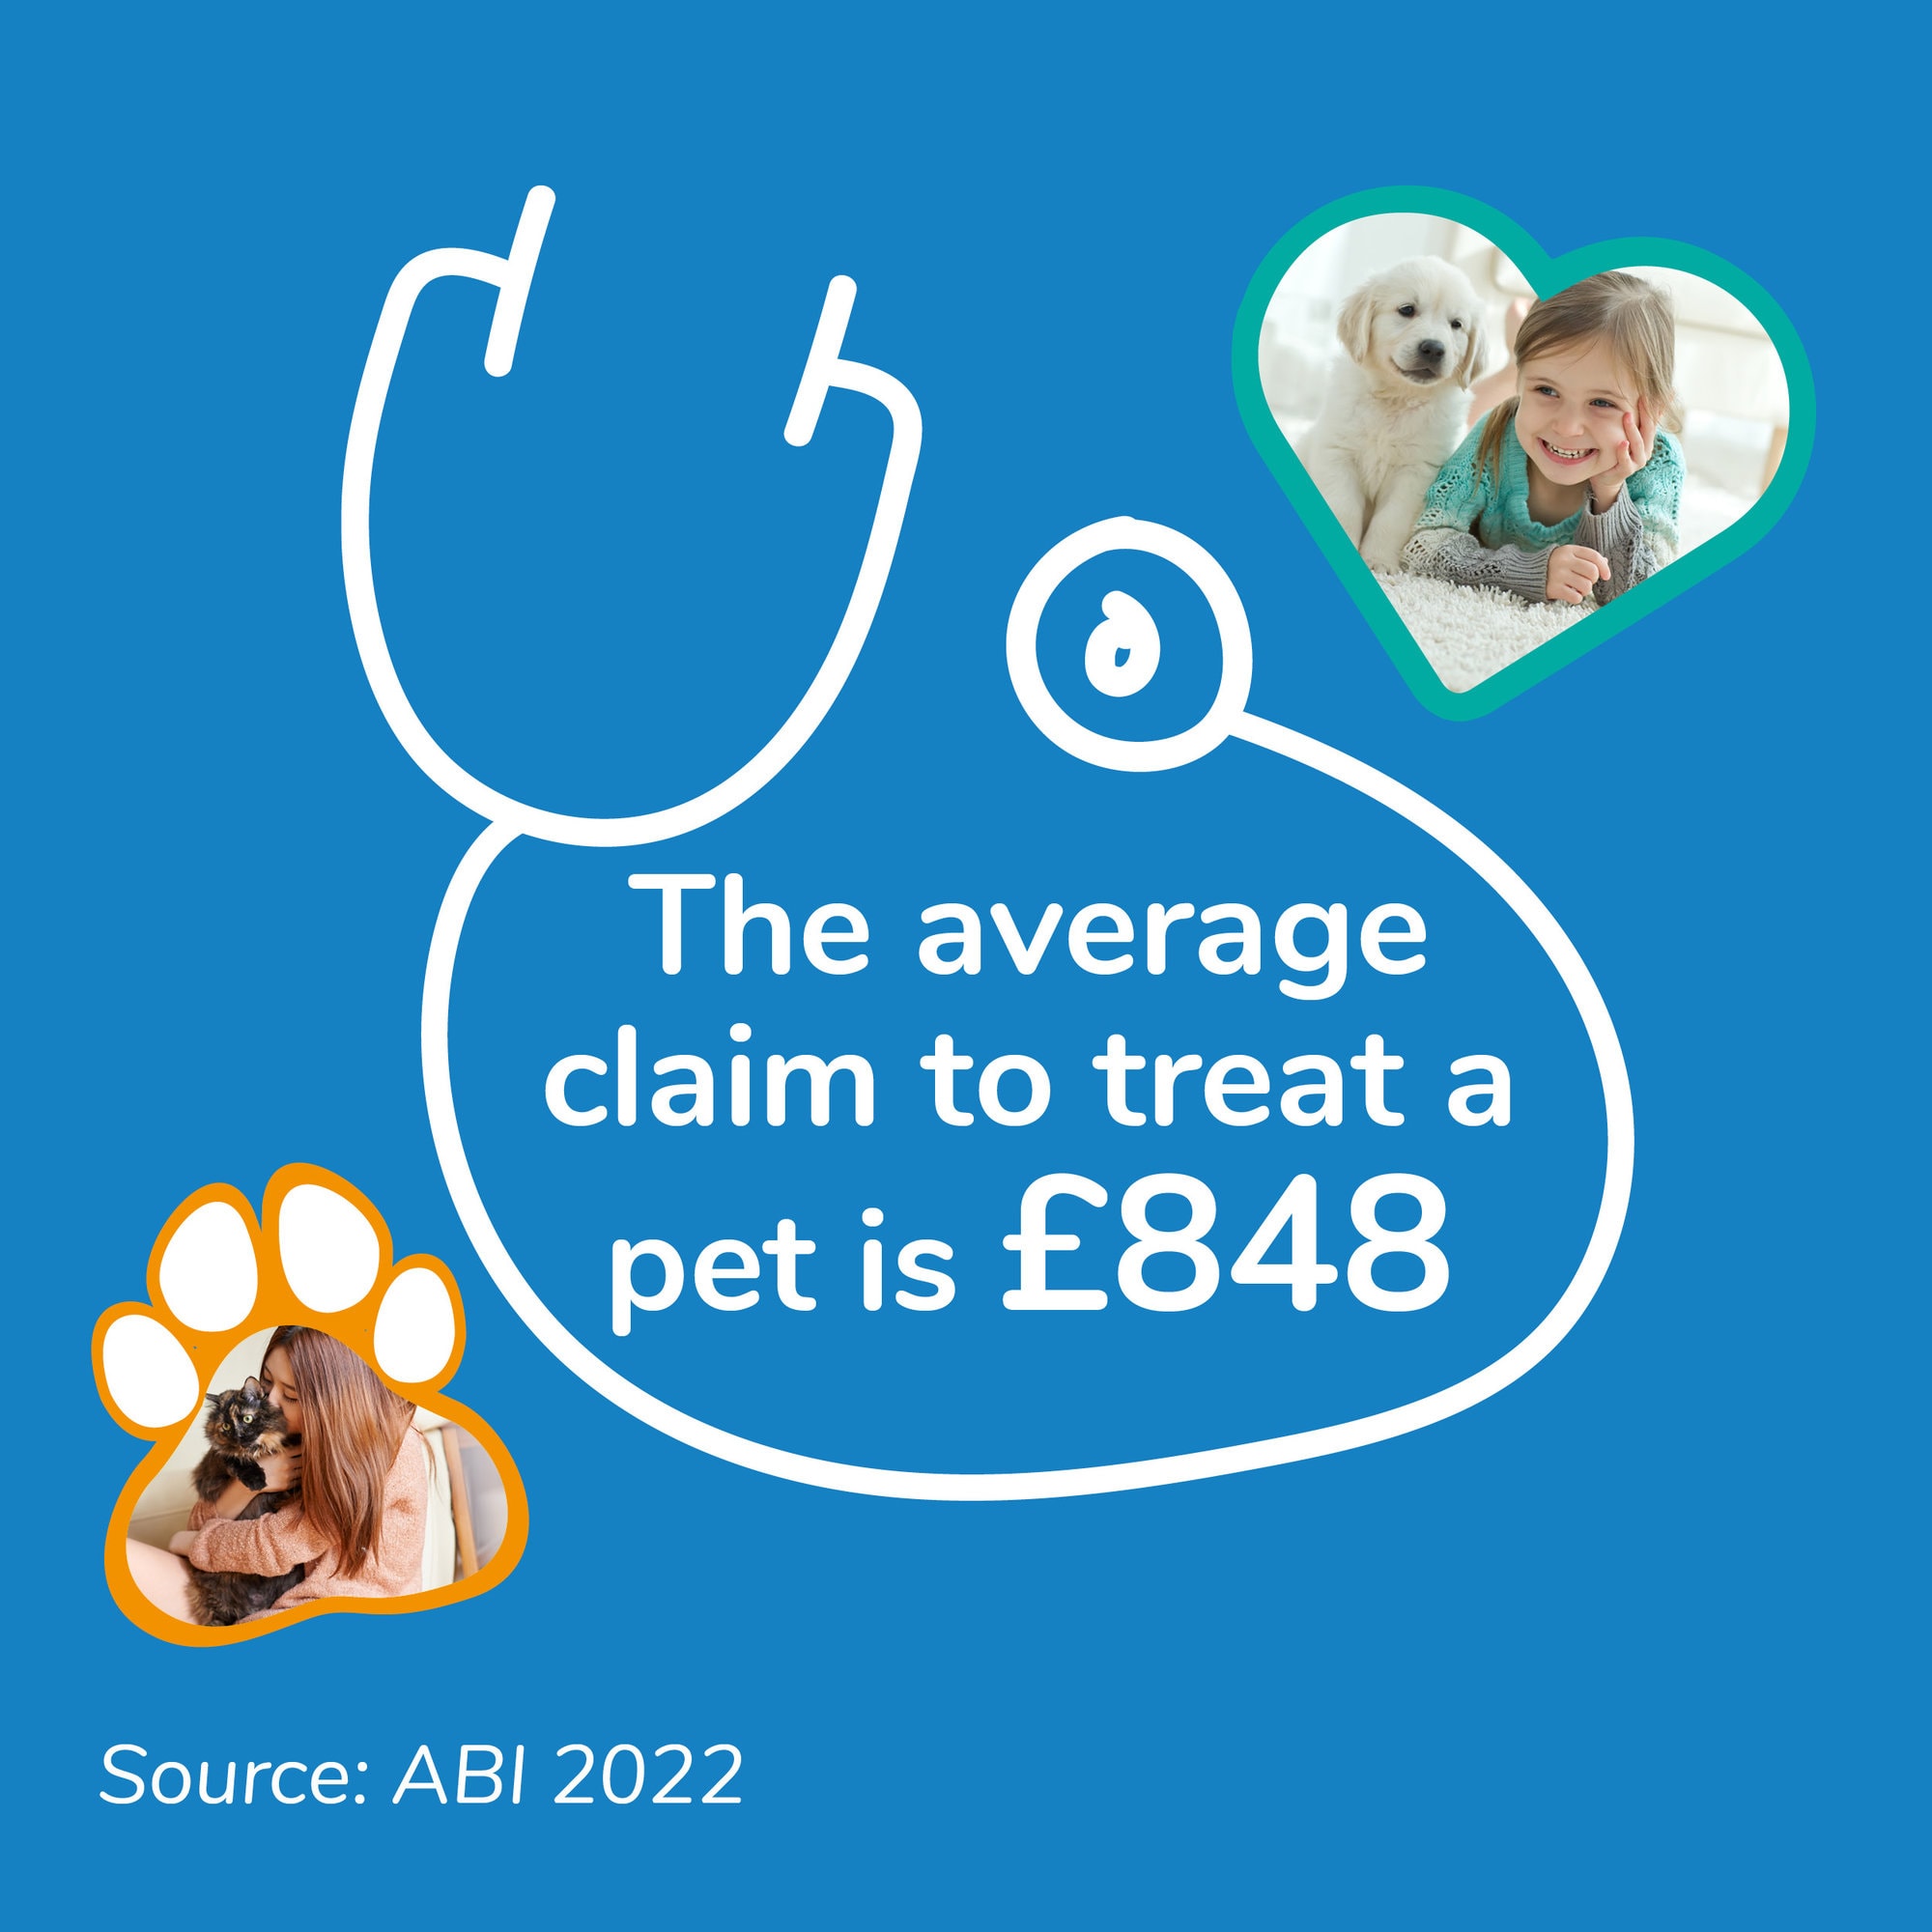 The average claim for pet insurance is £848